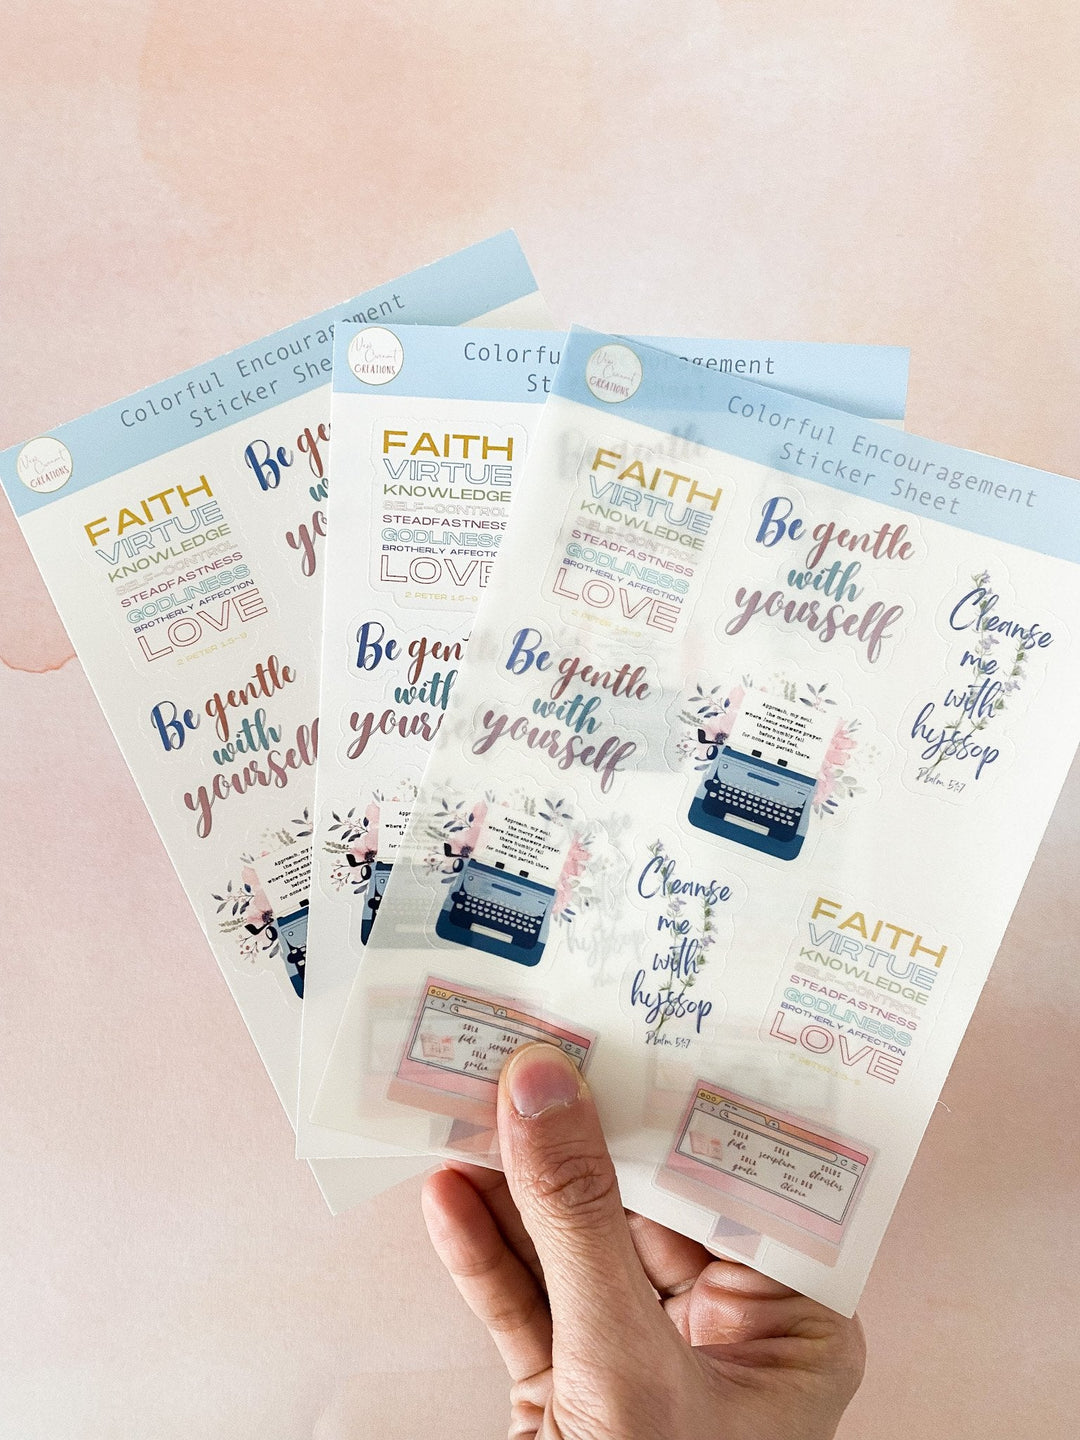 Colorful Encouragement Sticker Sheets - Oopsie